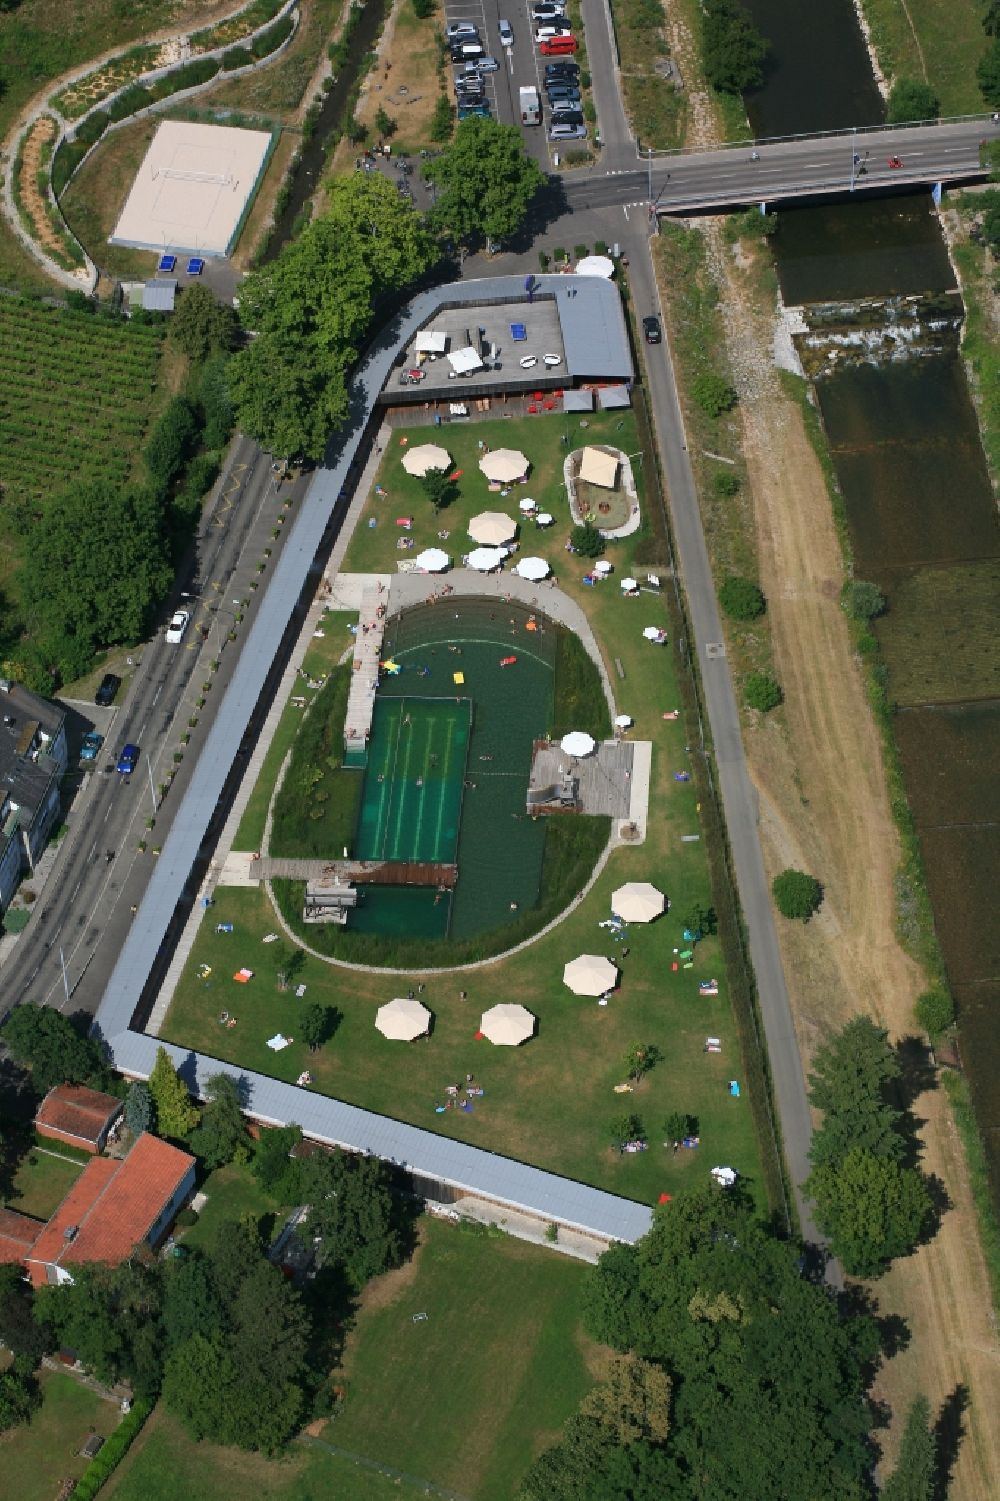 Aerial image Riehen - Bathers on the lawn by the pool of the swimming pool Naturbad Riehen in Riehen in the canton Basel, Switzerland